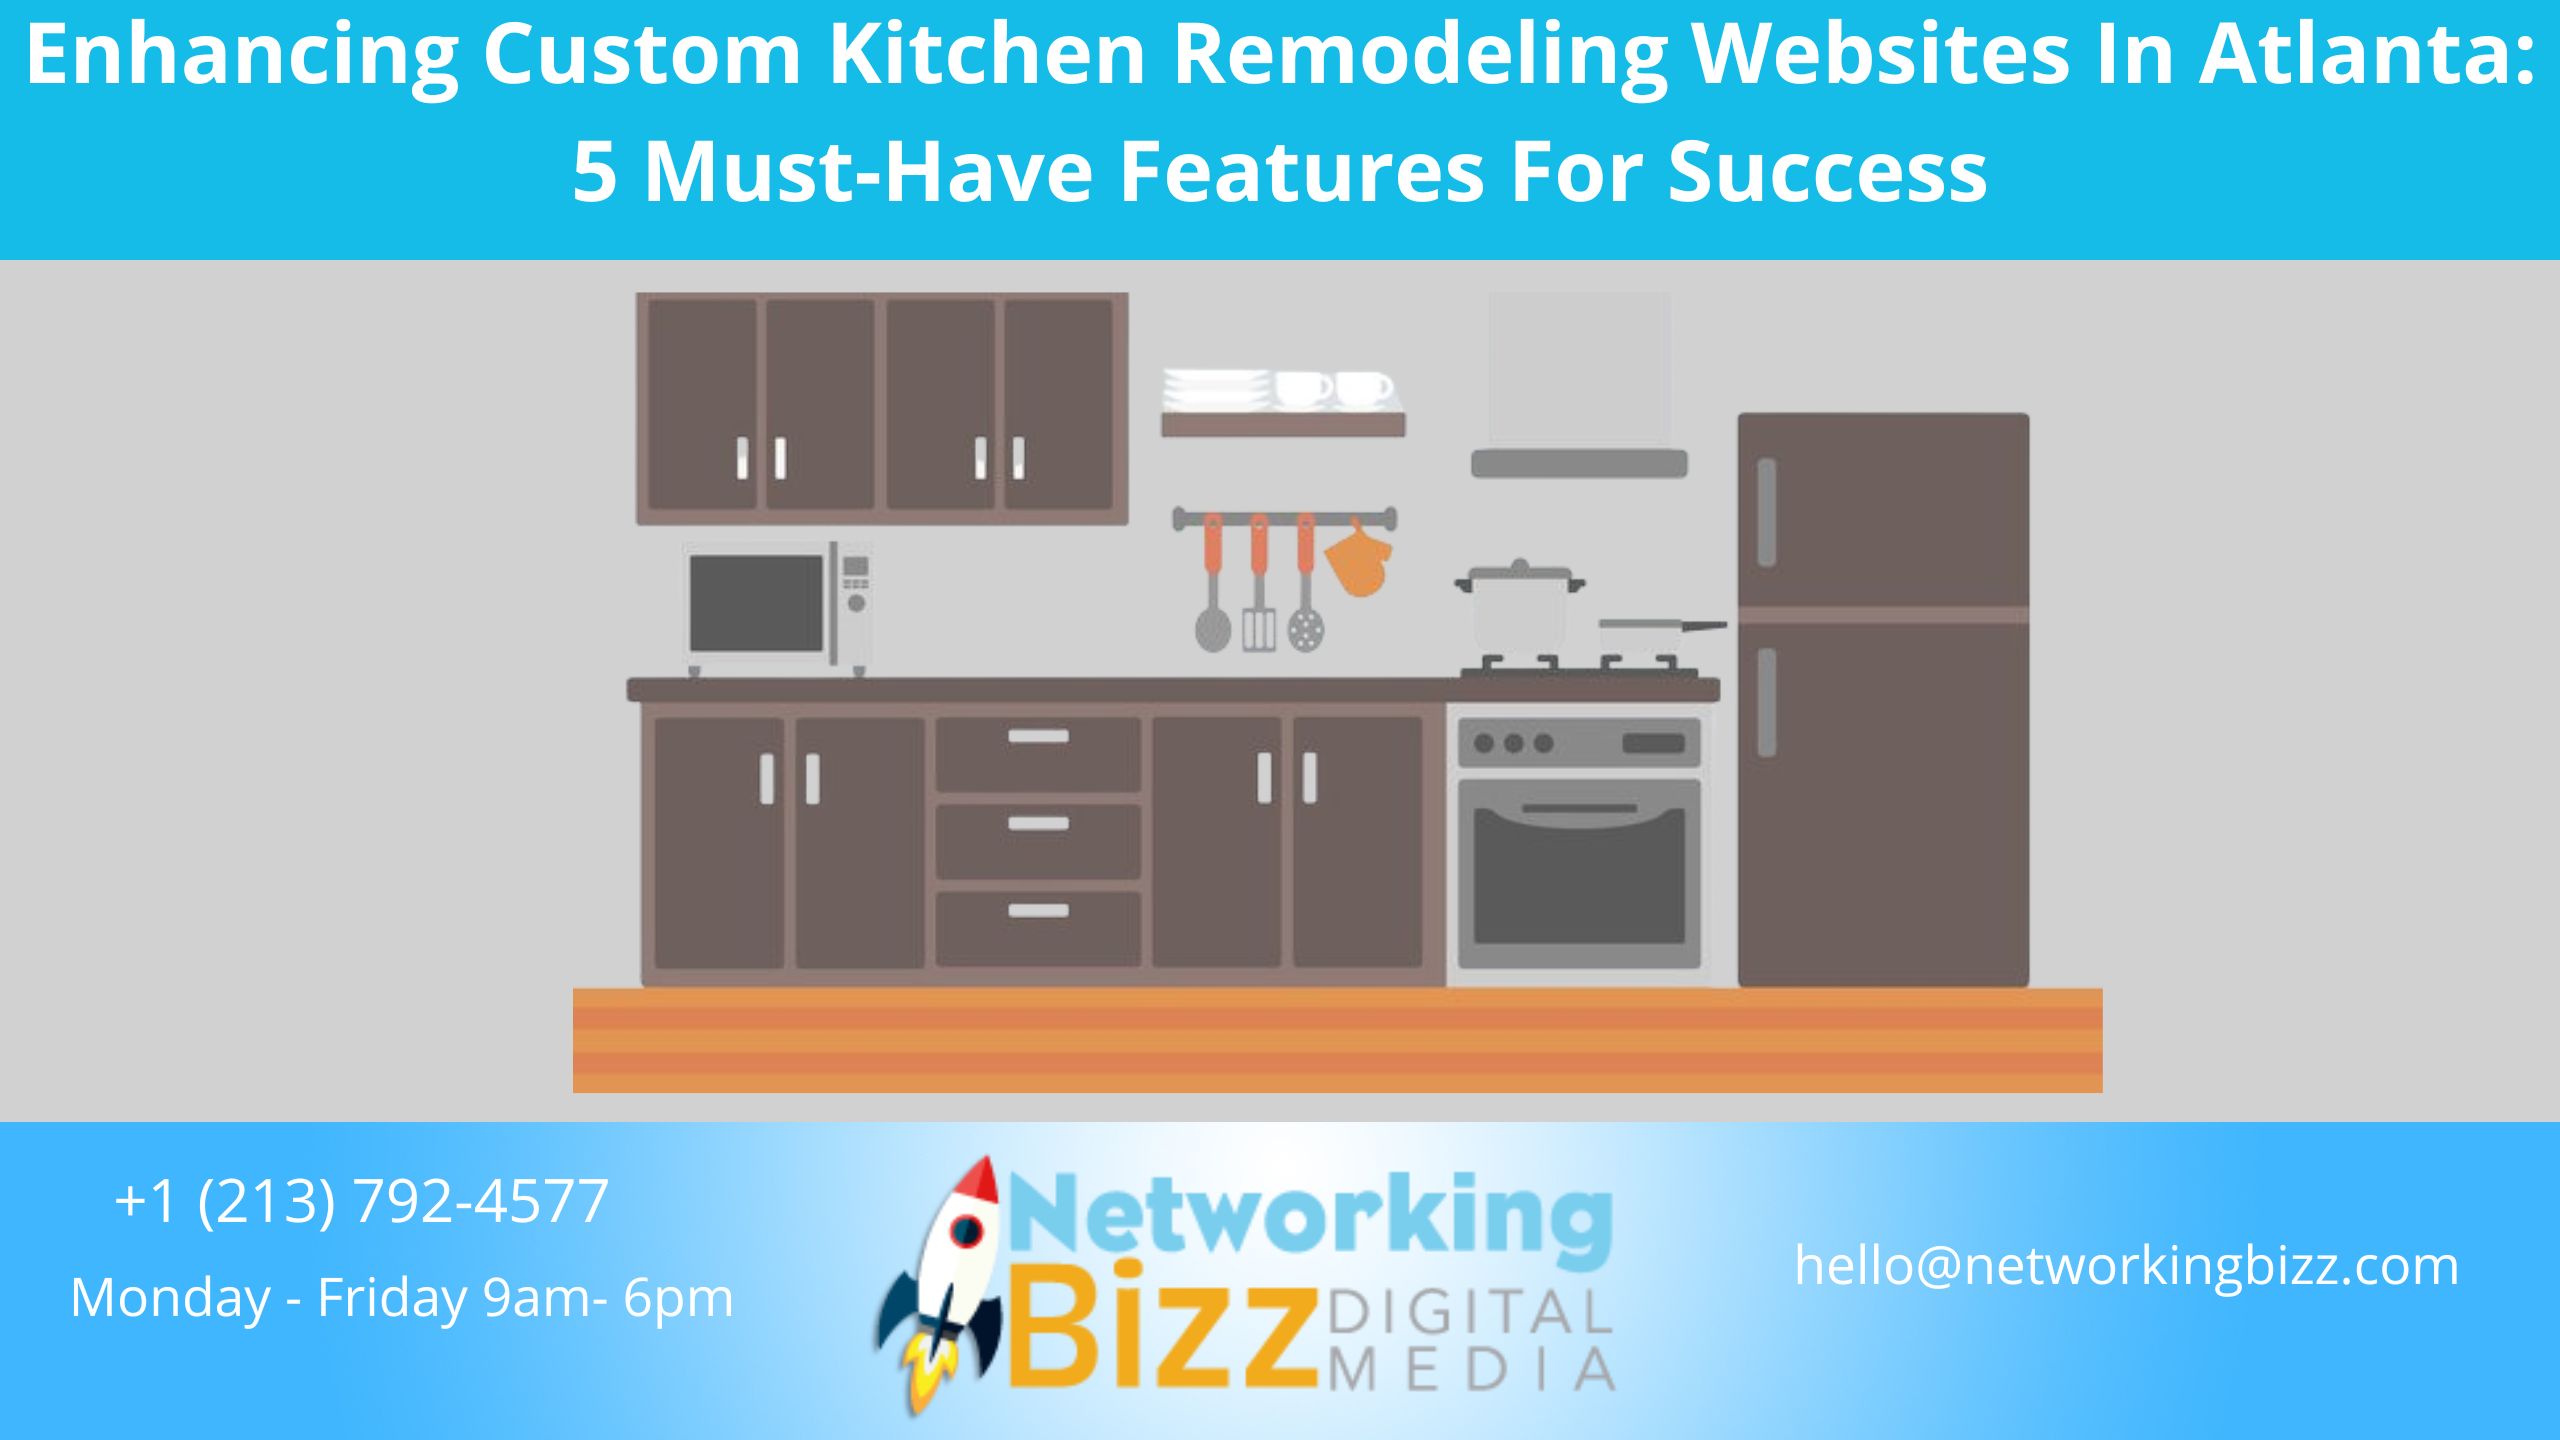 Enhancing Custom Kitchen Remodeling Websites In Atlanta: 5 Must-Have Features For Success